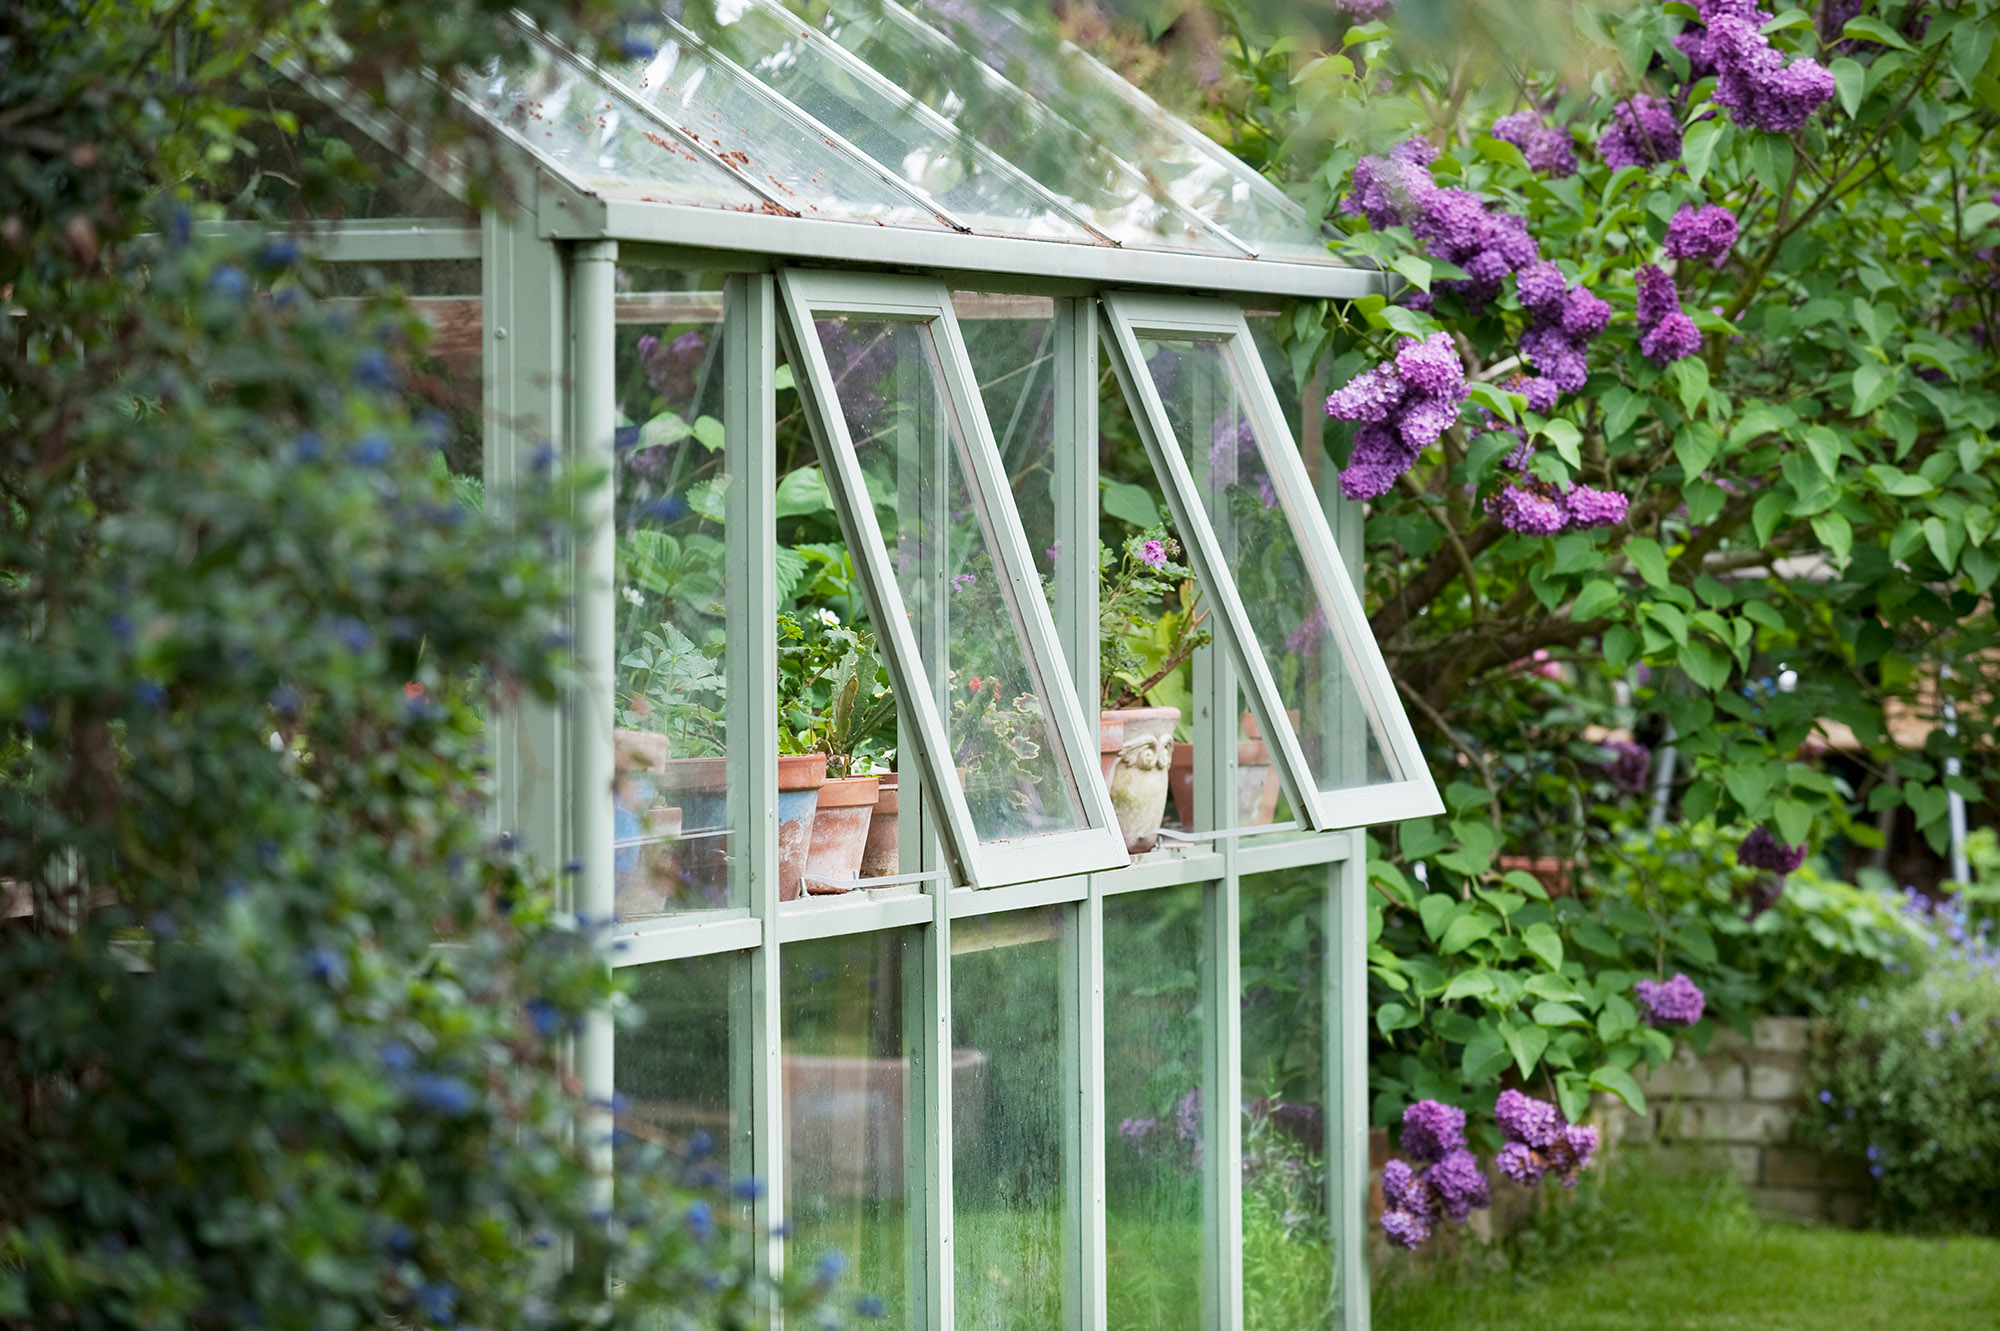 Close up of greenhouse windows in back garden